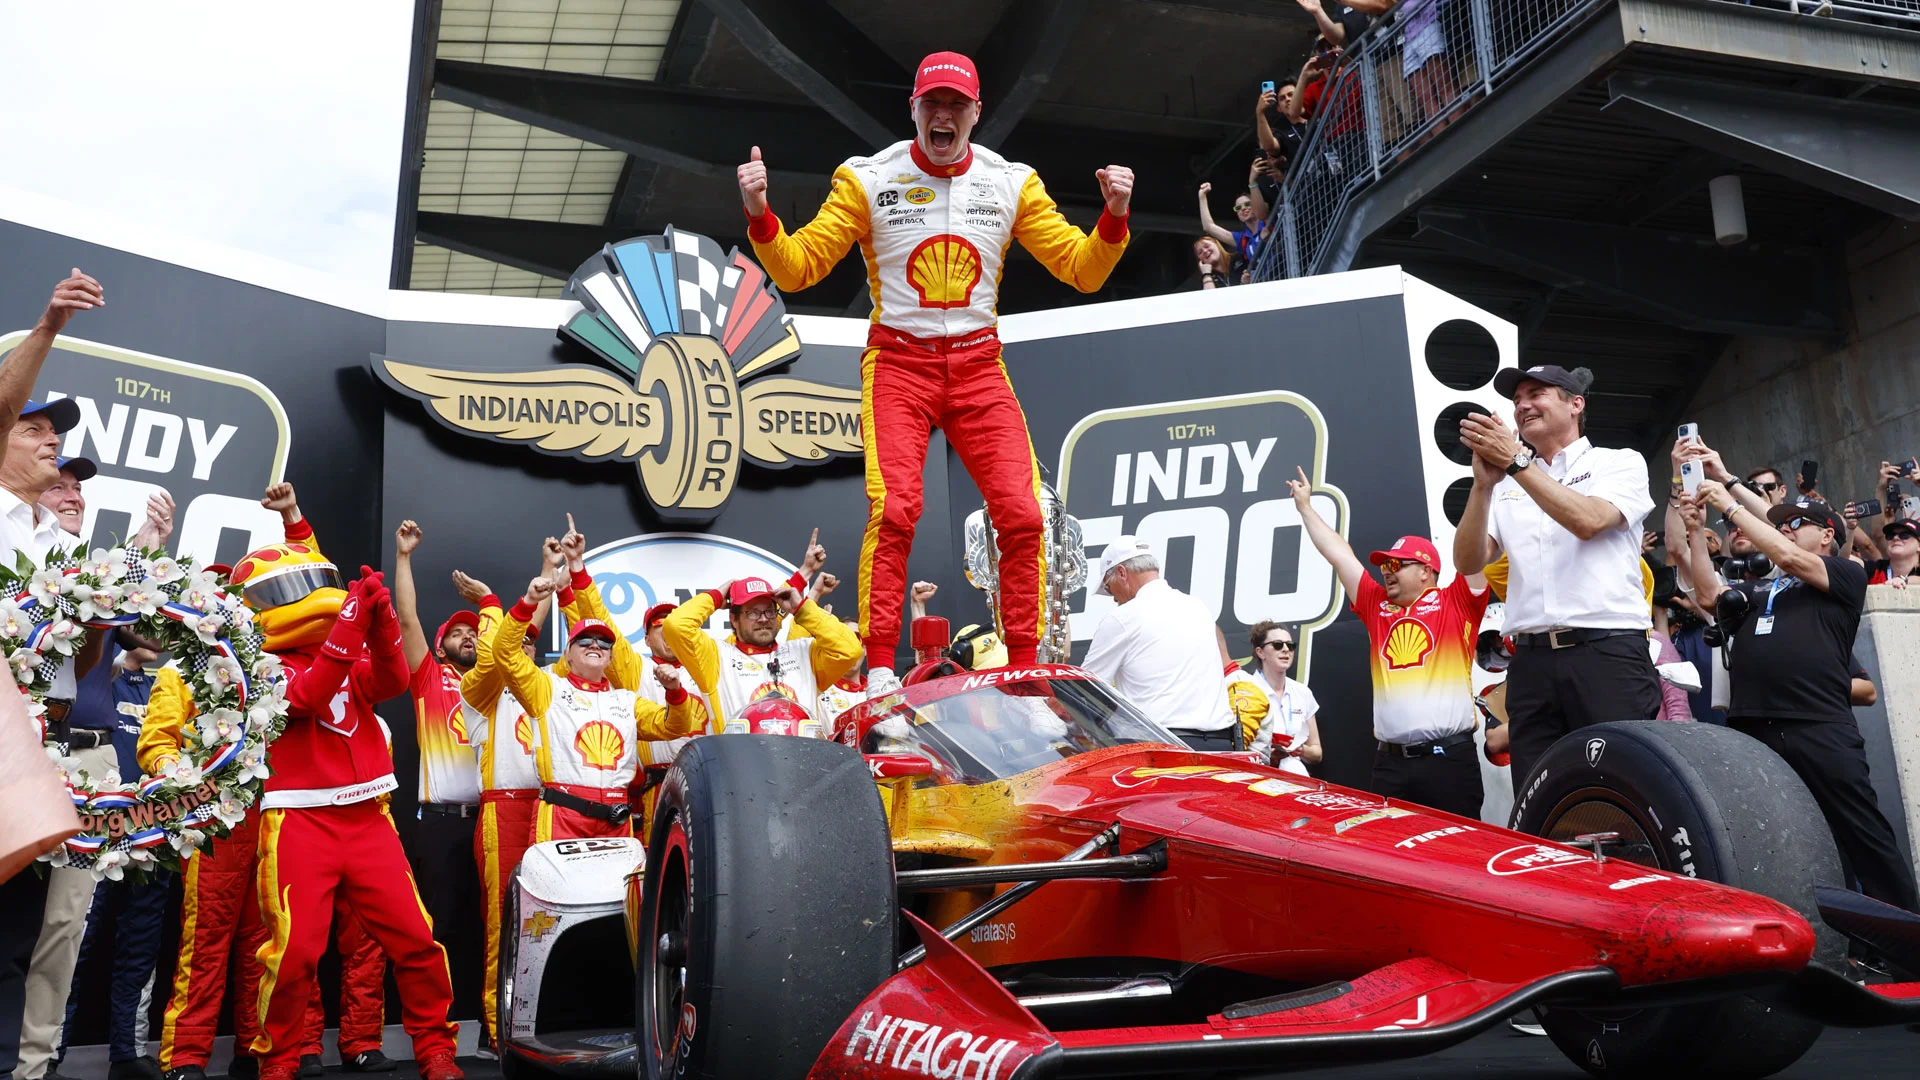 Indy 500 Thrills: Experience High-Octane Excitement and Speed at America’s Iconic Race